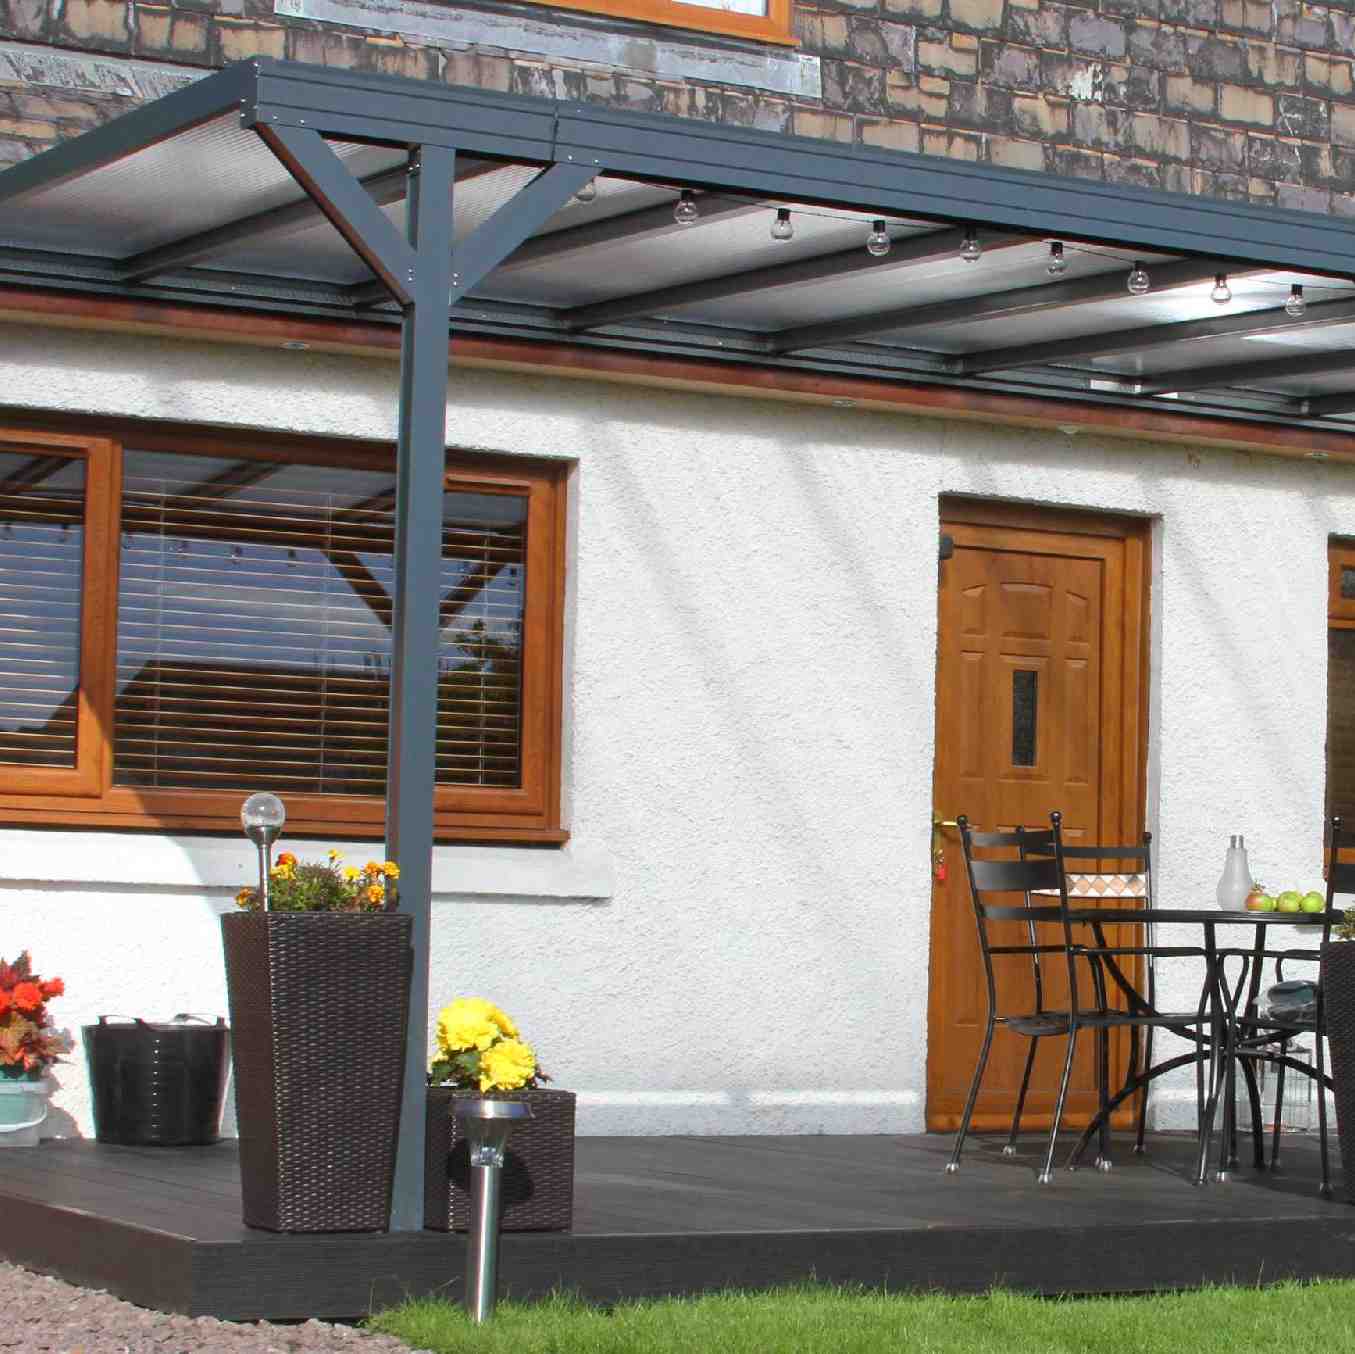 Omega Verandah, Anthracite Grey, 6mm Glass Clear Plate Polycarbonate Glazing - 7.0m (W) x 1.5m (P), (4) Supporting Posts